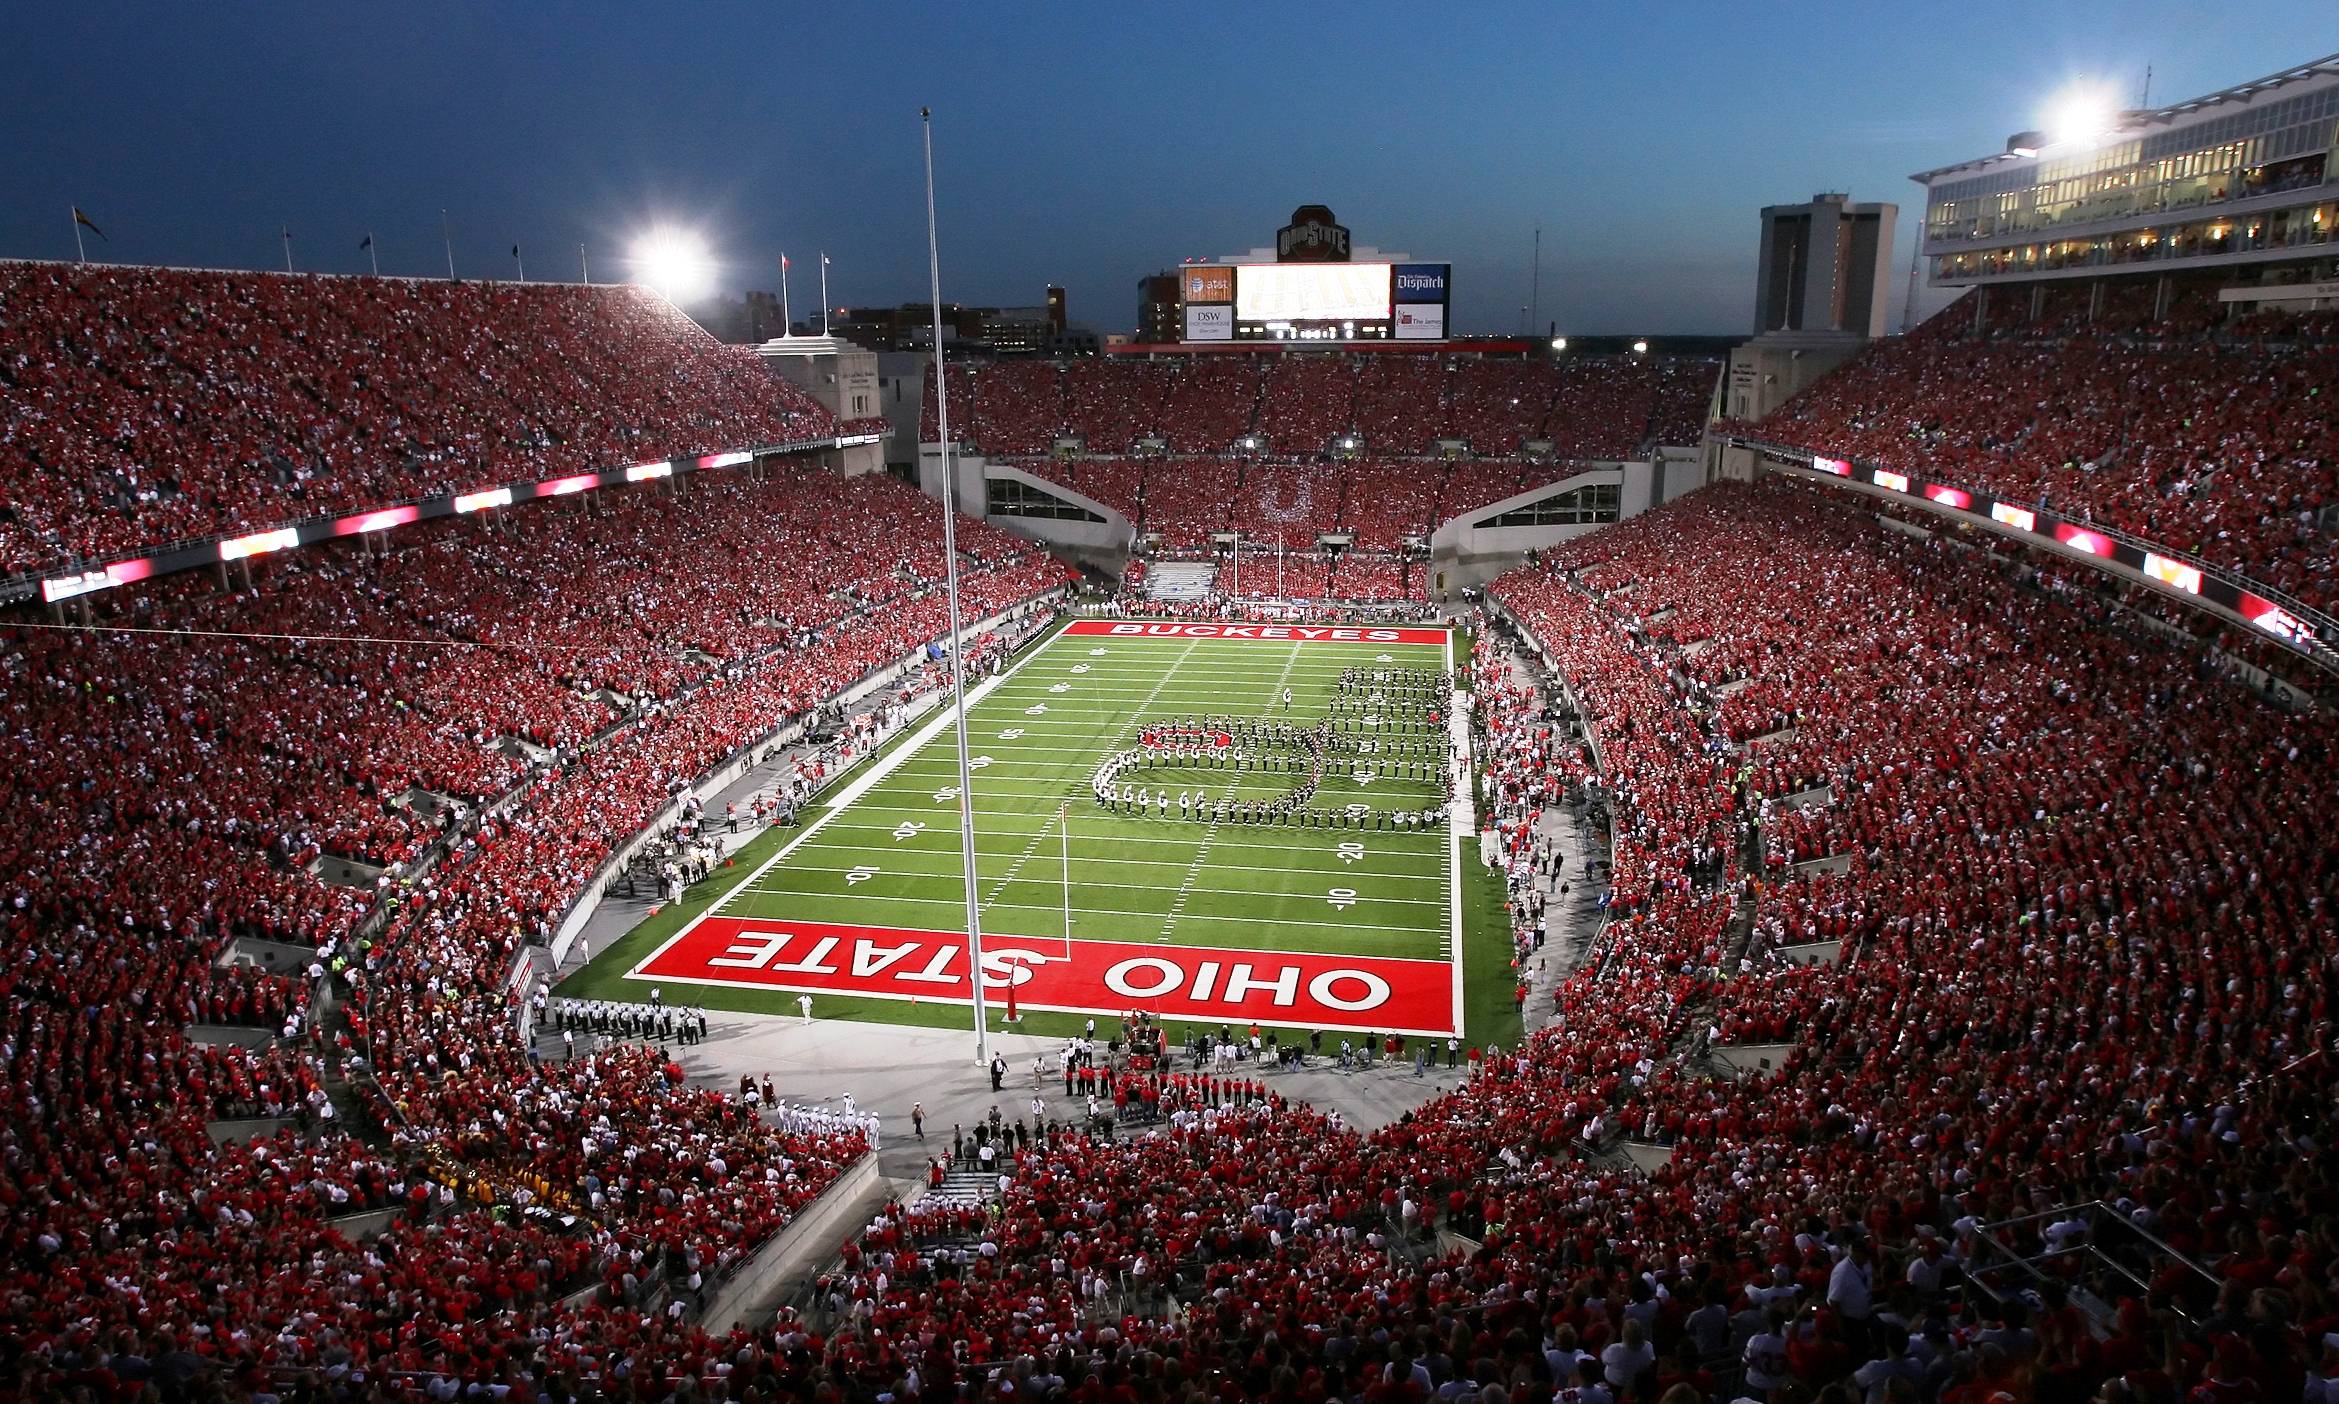 Ohio State Wallpapers - Wallpaper Cave